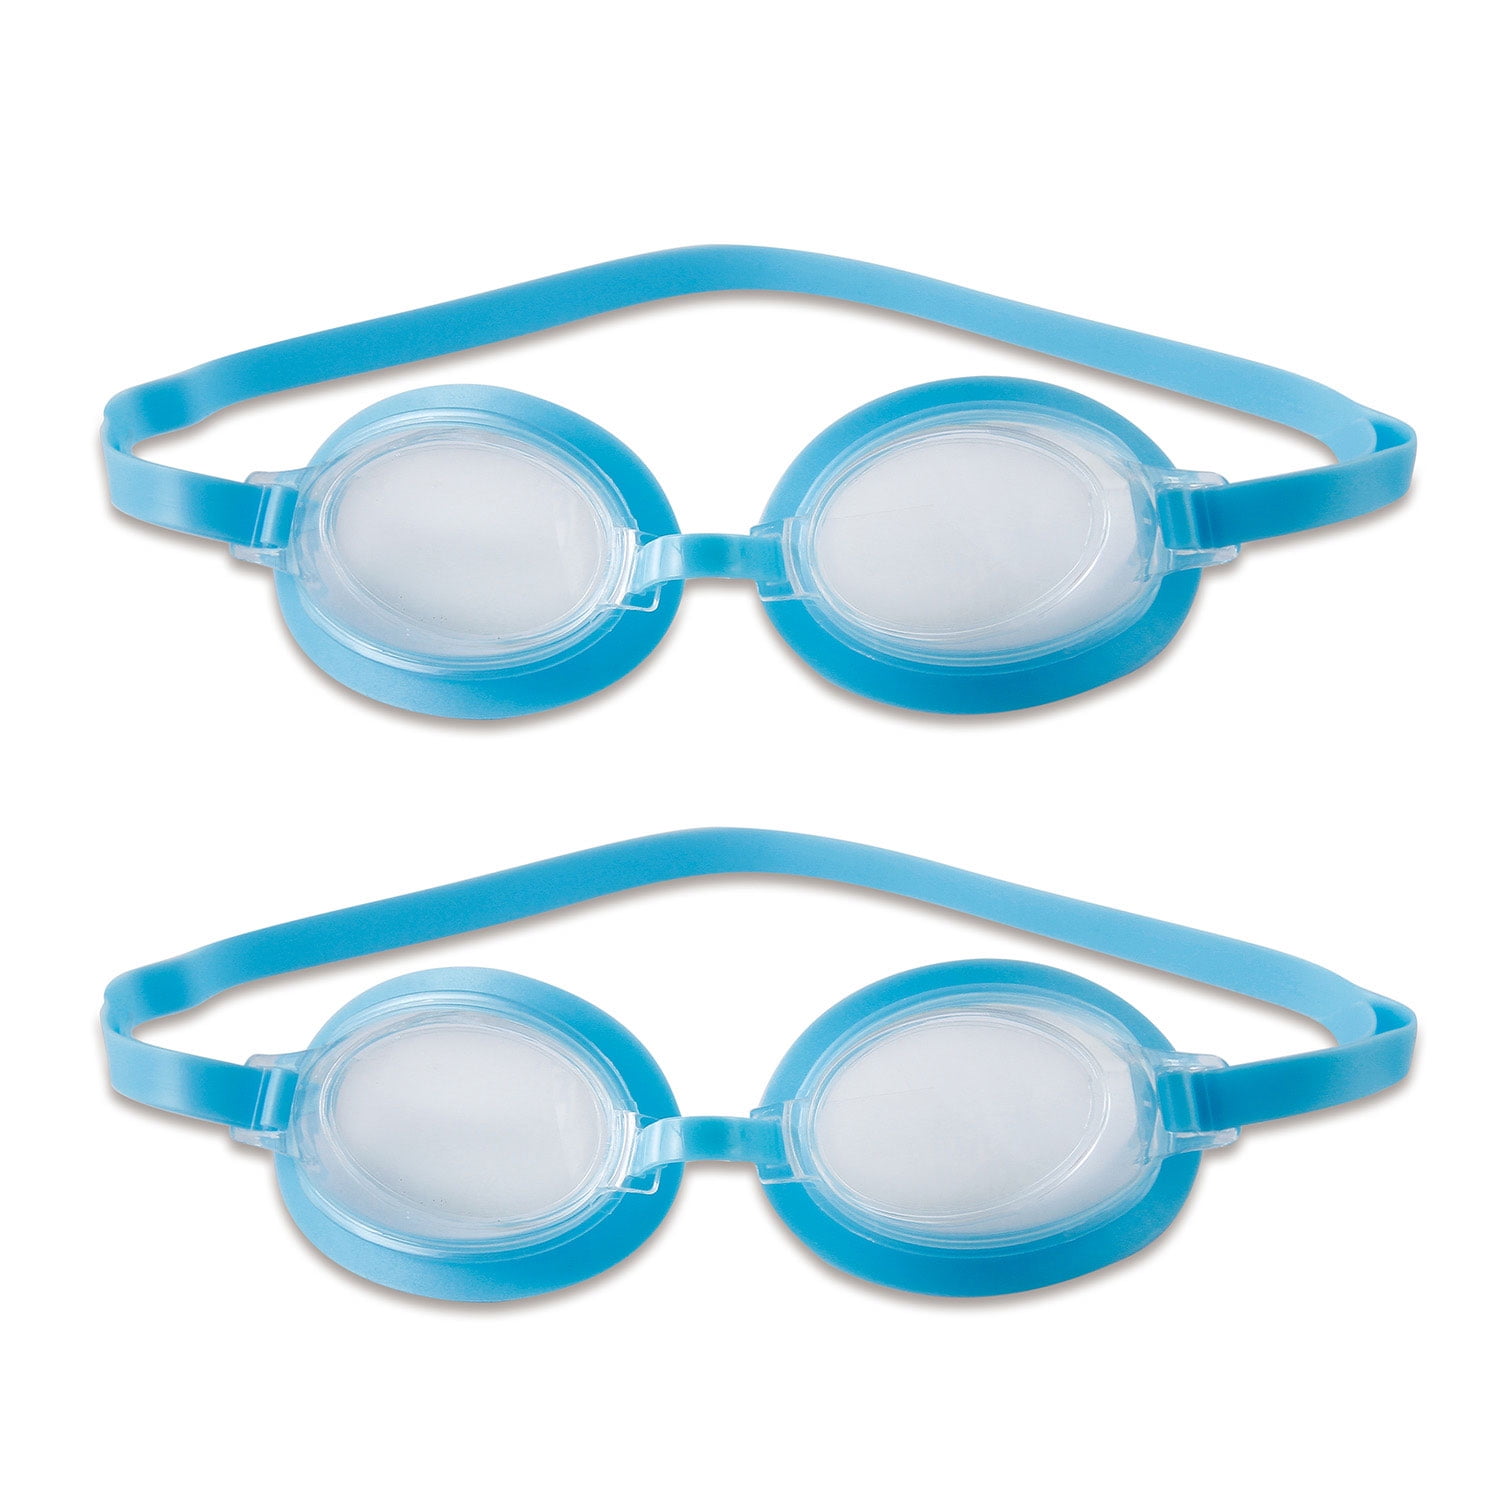 Summer Waves 3D Round Family Pool 90 x 90 x 22 with 1 Pair of 3D Goggles 